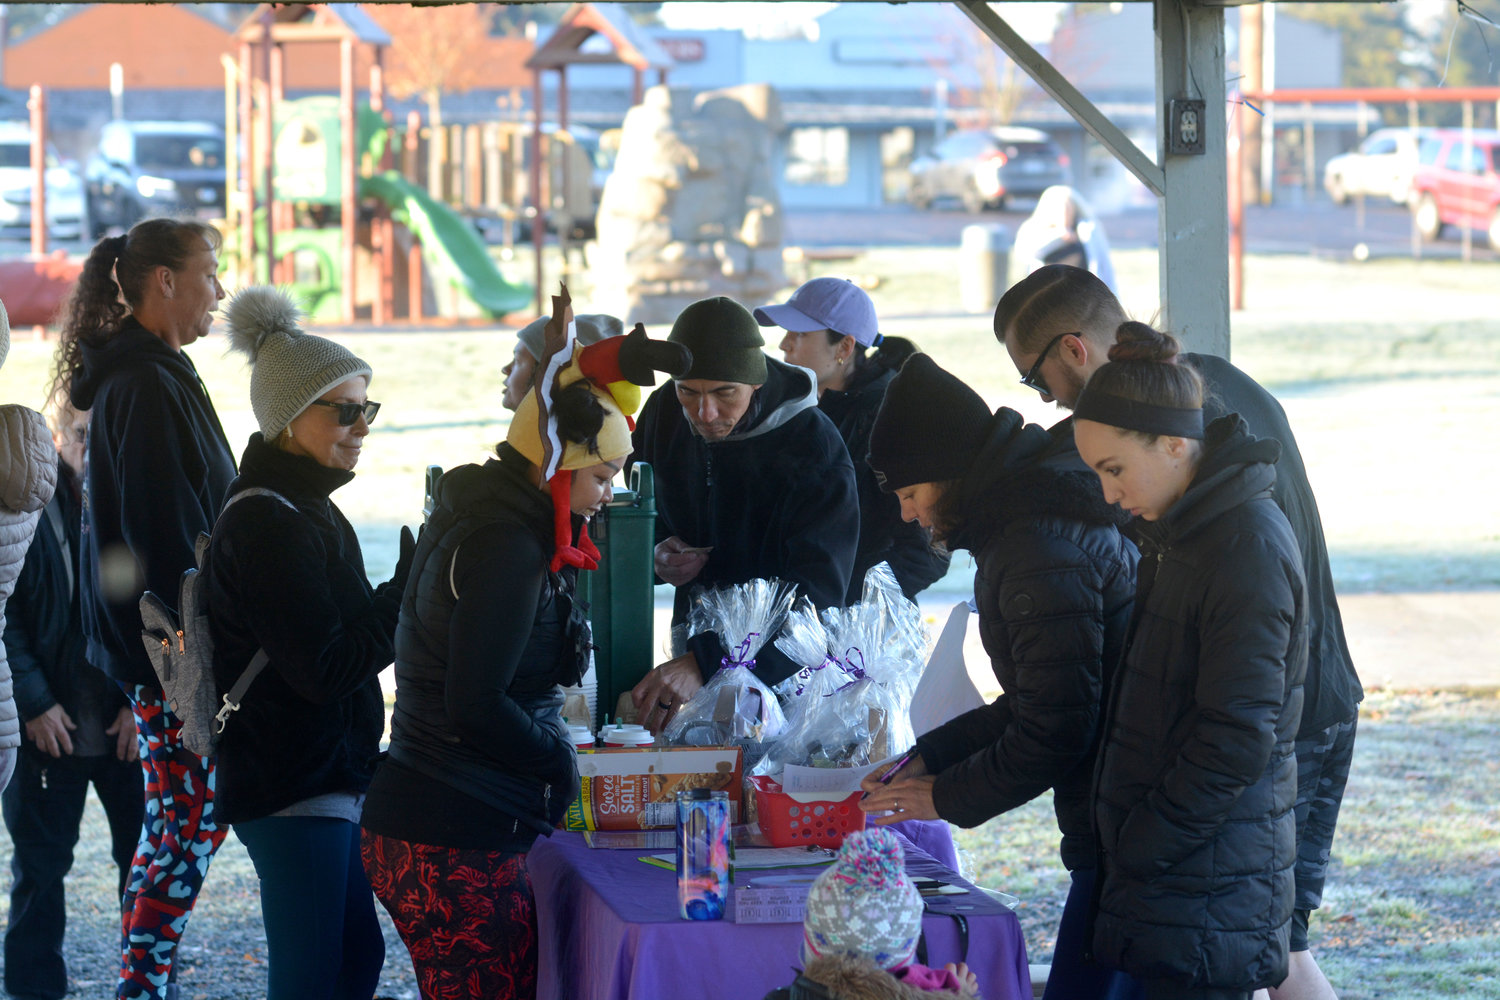 Participants in Yelm Anytime Fitness’s Thanksgiving turkey trot check in prior to the event’s start in this file photo.